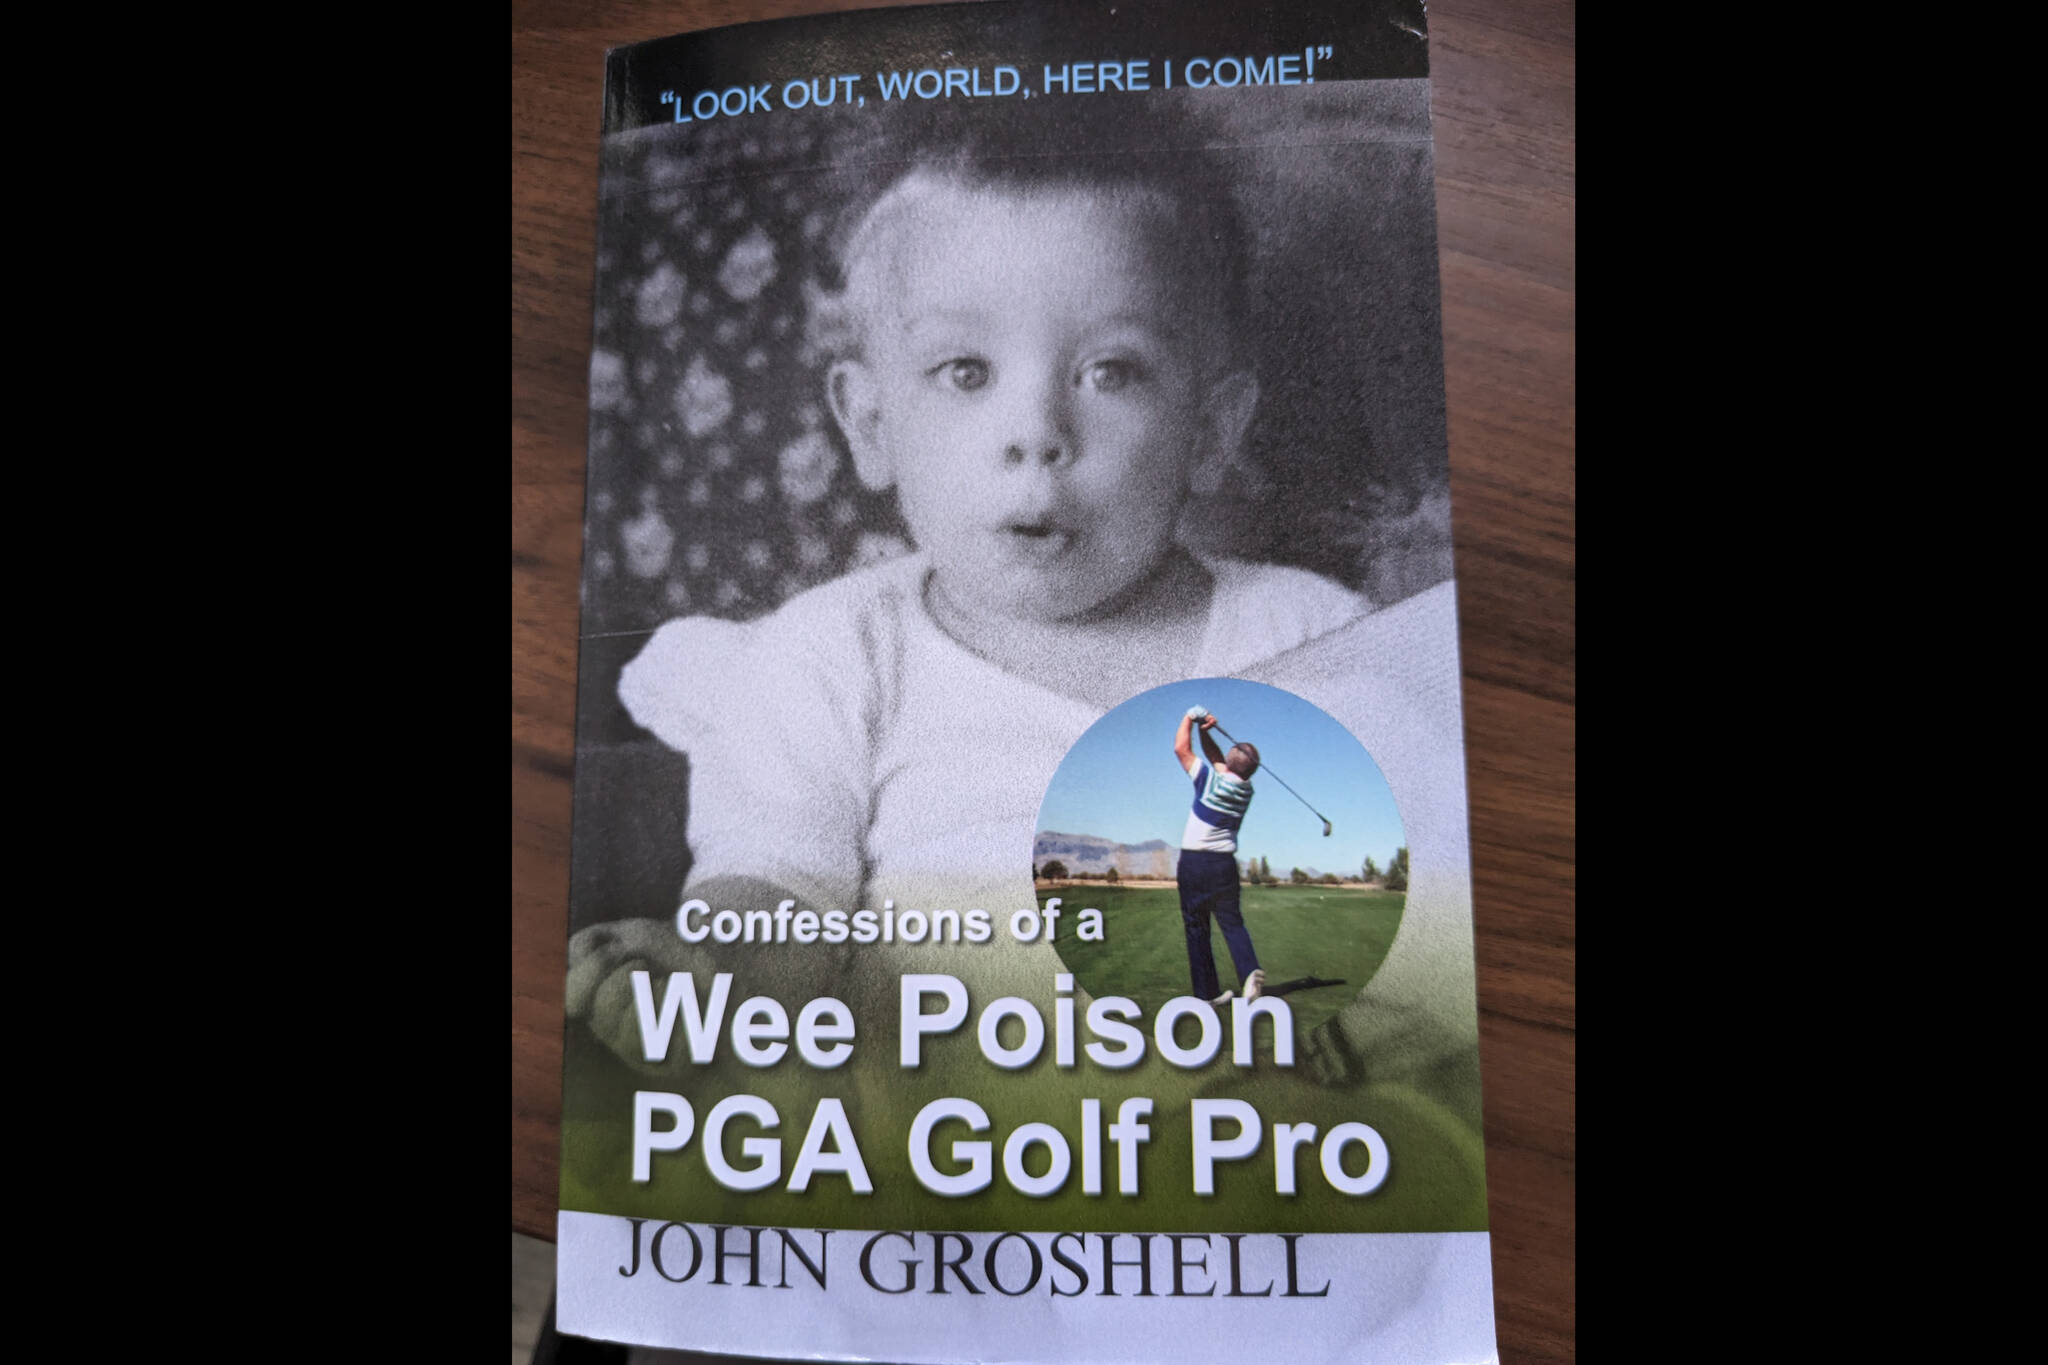 The cover of John Groshell’s memoir, “Confessions of a Wee Poison PGA Golf Pro.”